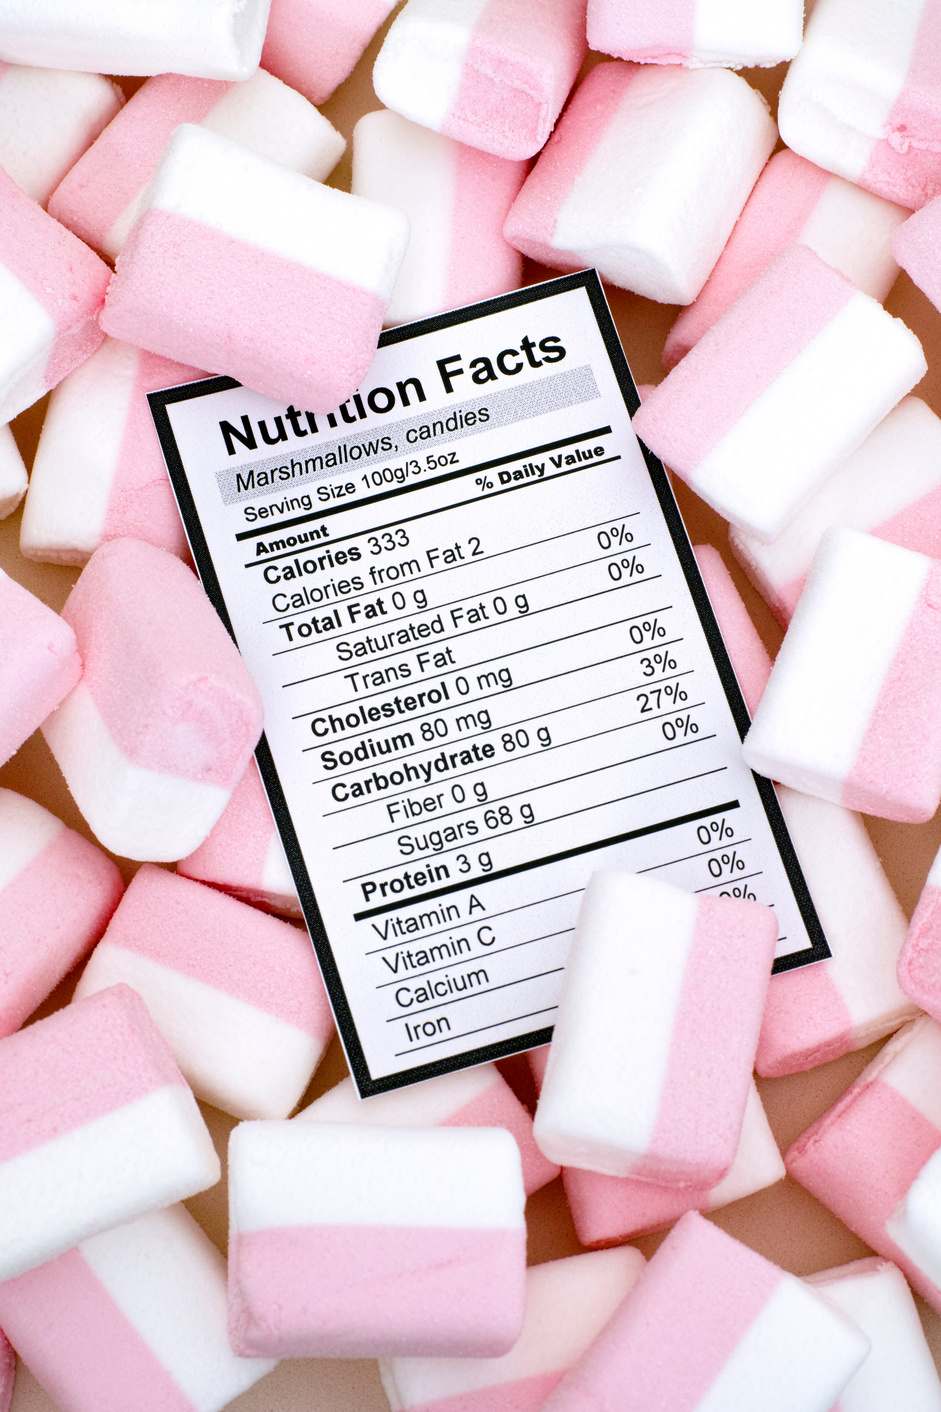 Nutrition facts of marshmallows candies